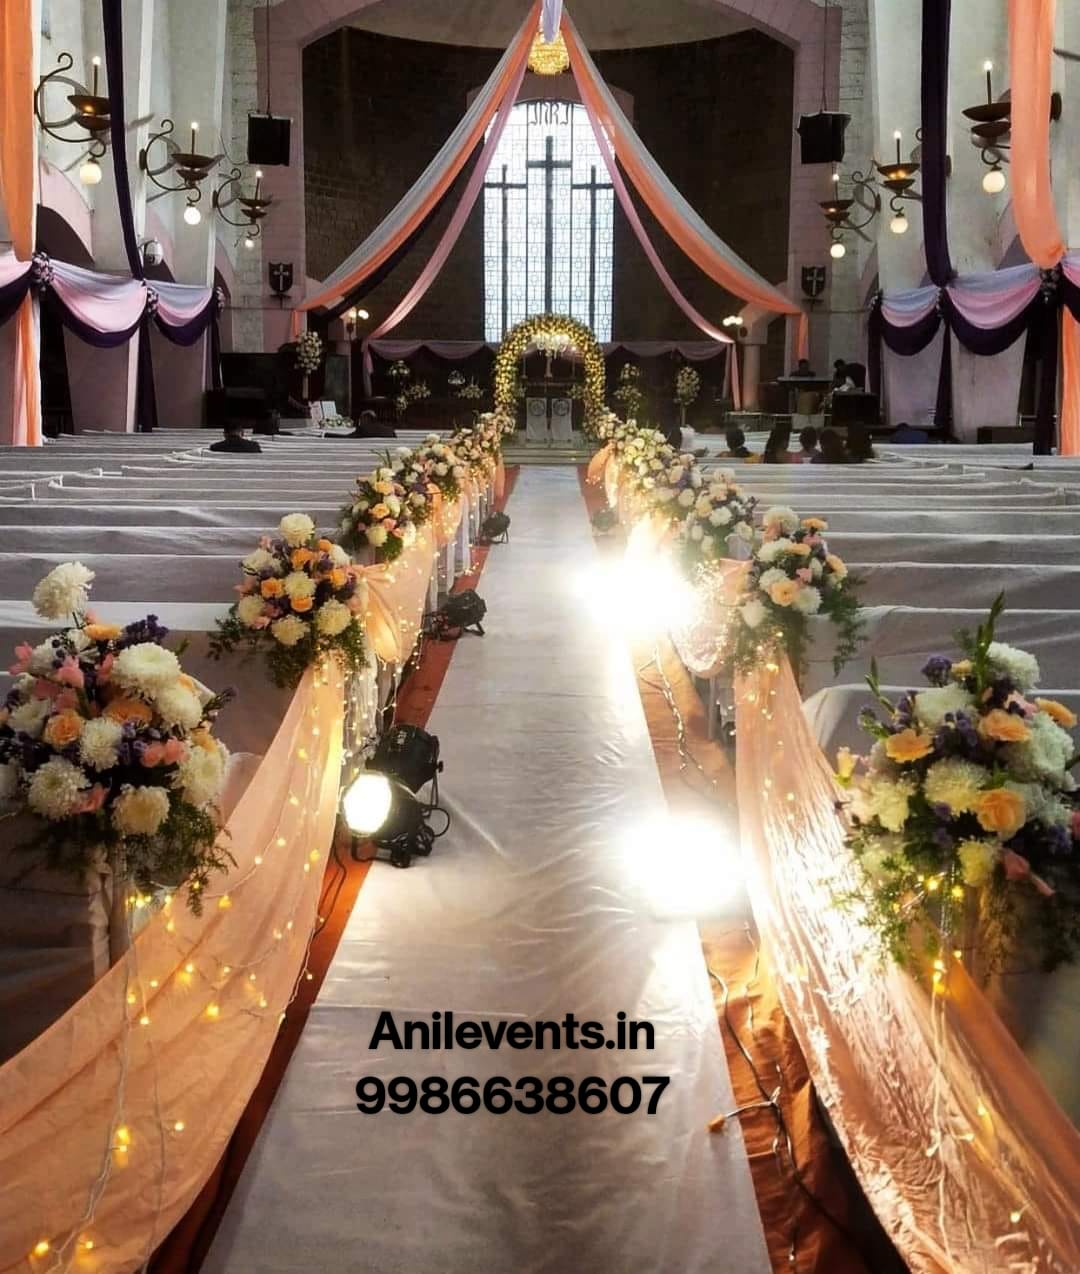 flower decoration for wedding in Church – Anil Events Bangalore